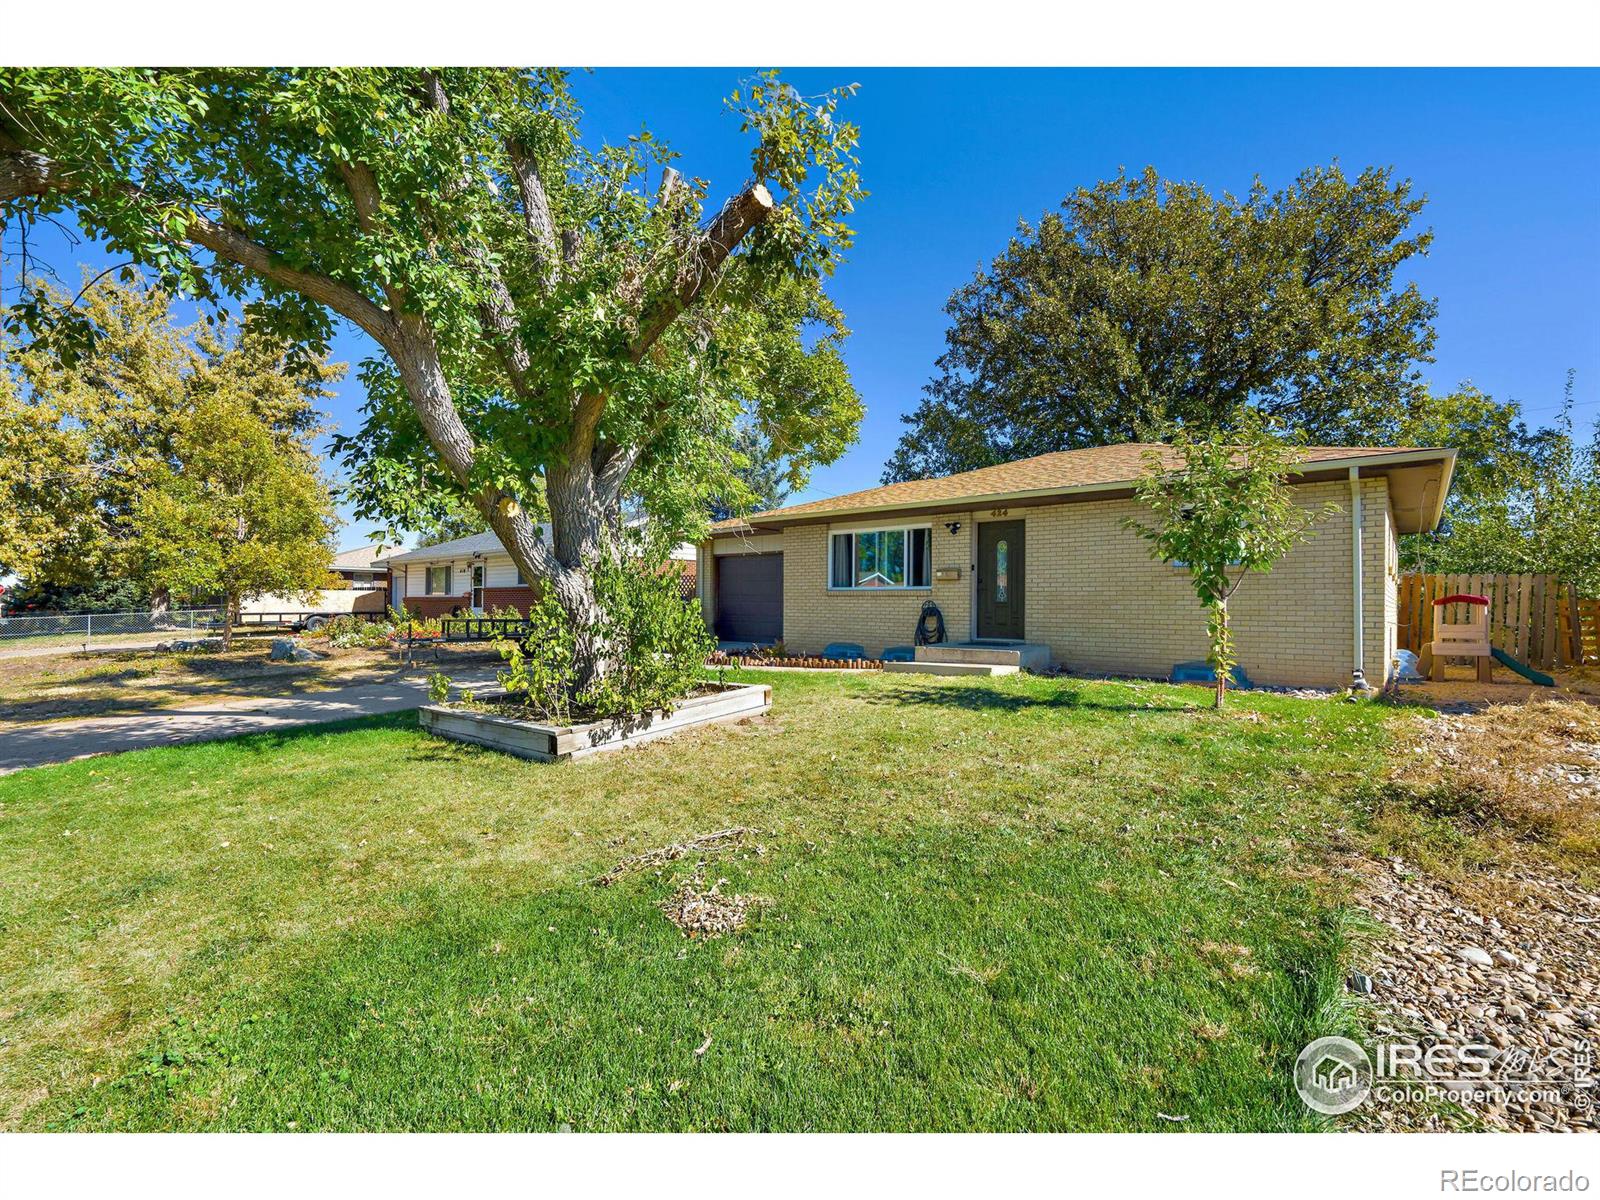 424  29th avenue, Greeley sold home. Closed on 2024-02-02 for $335,000.